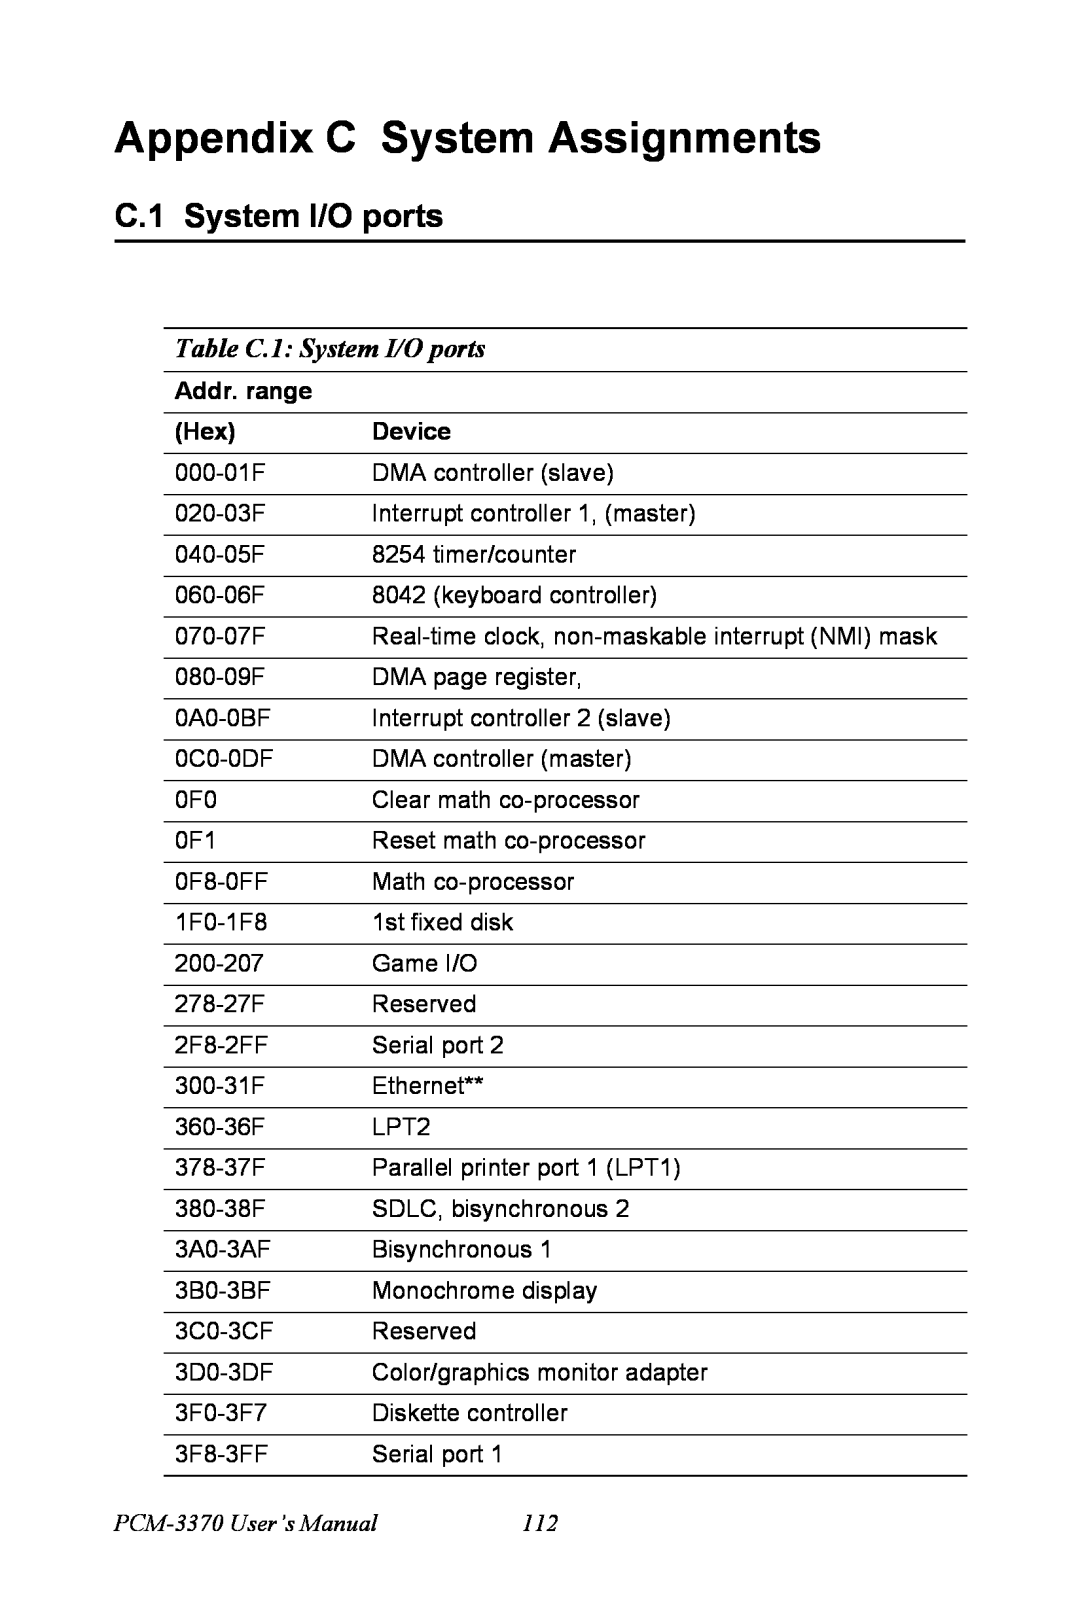 Intel Appendix C System Assignments, Table C.1 System I/O ports, Addr. range, Device, PCM-3370 User’s Manual 